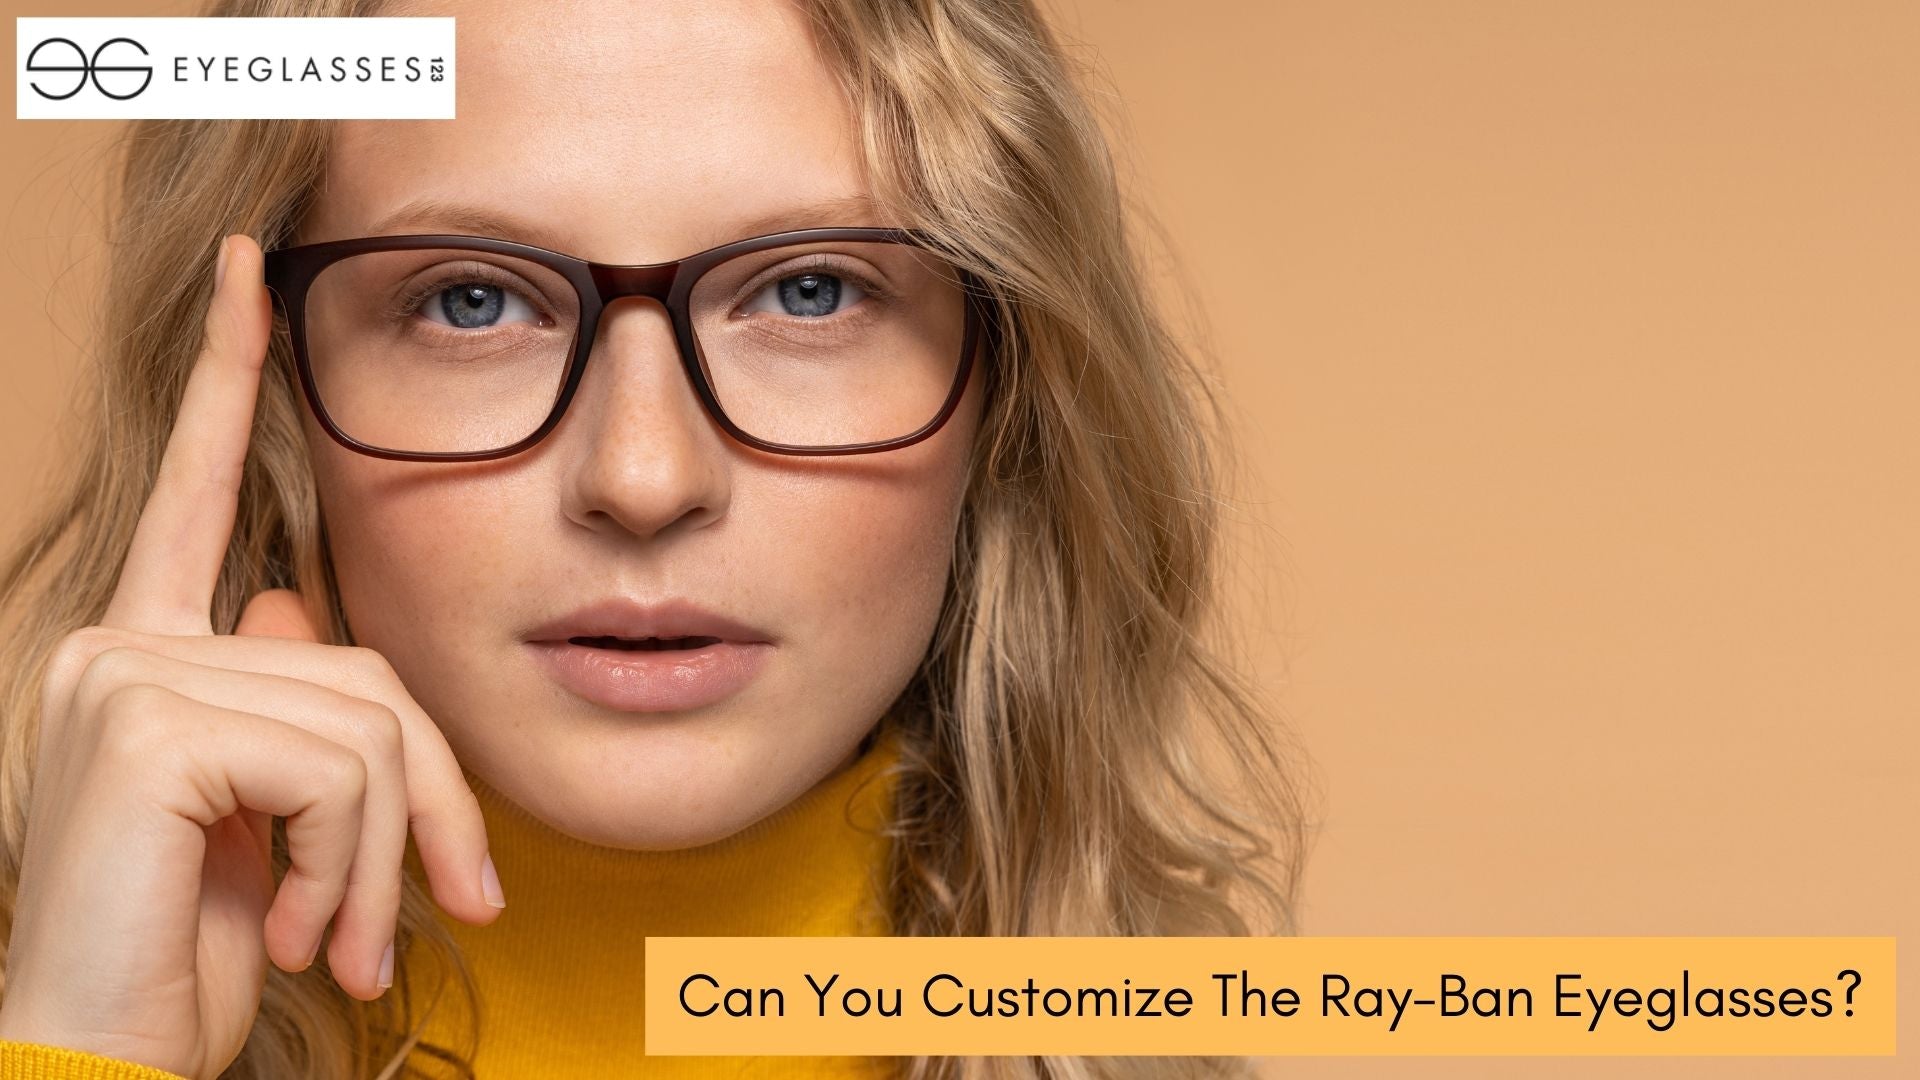 Can You Customize The Ray-Ban Eyeglasses?